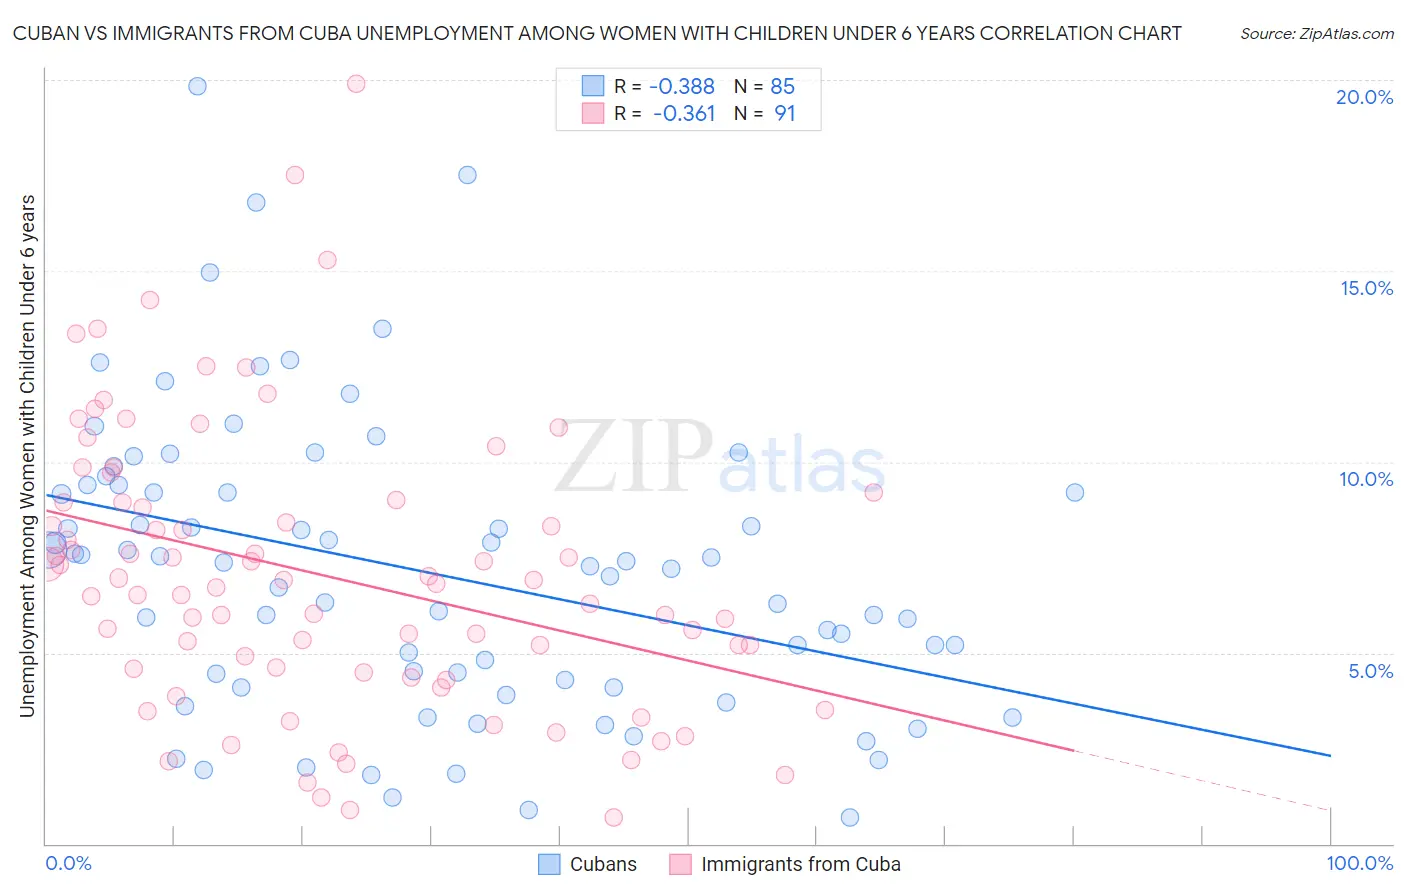 Cuban vs Immigrants from Cuba Unemployment Among Women with Children Under 6 years